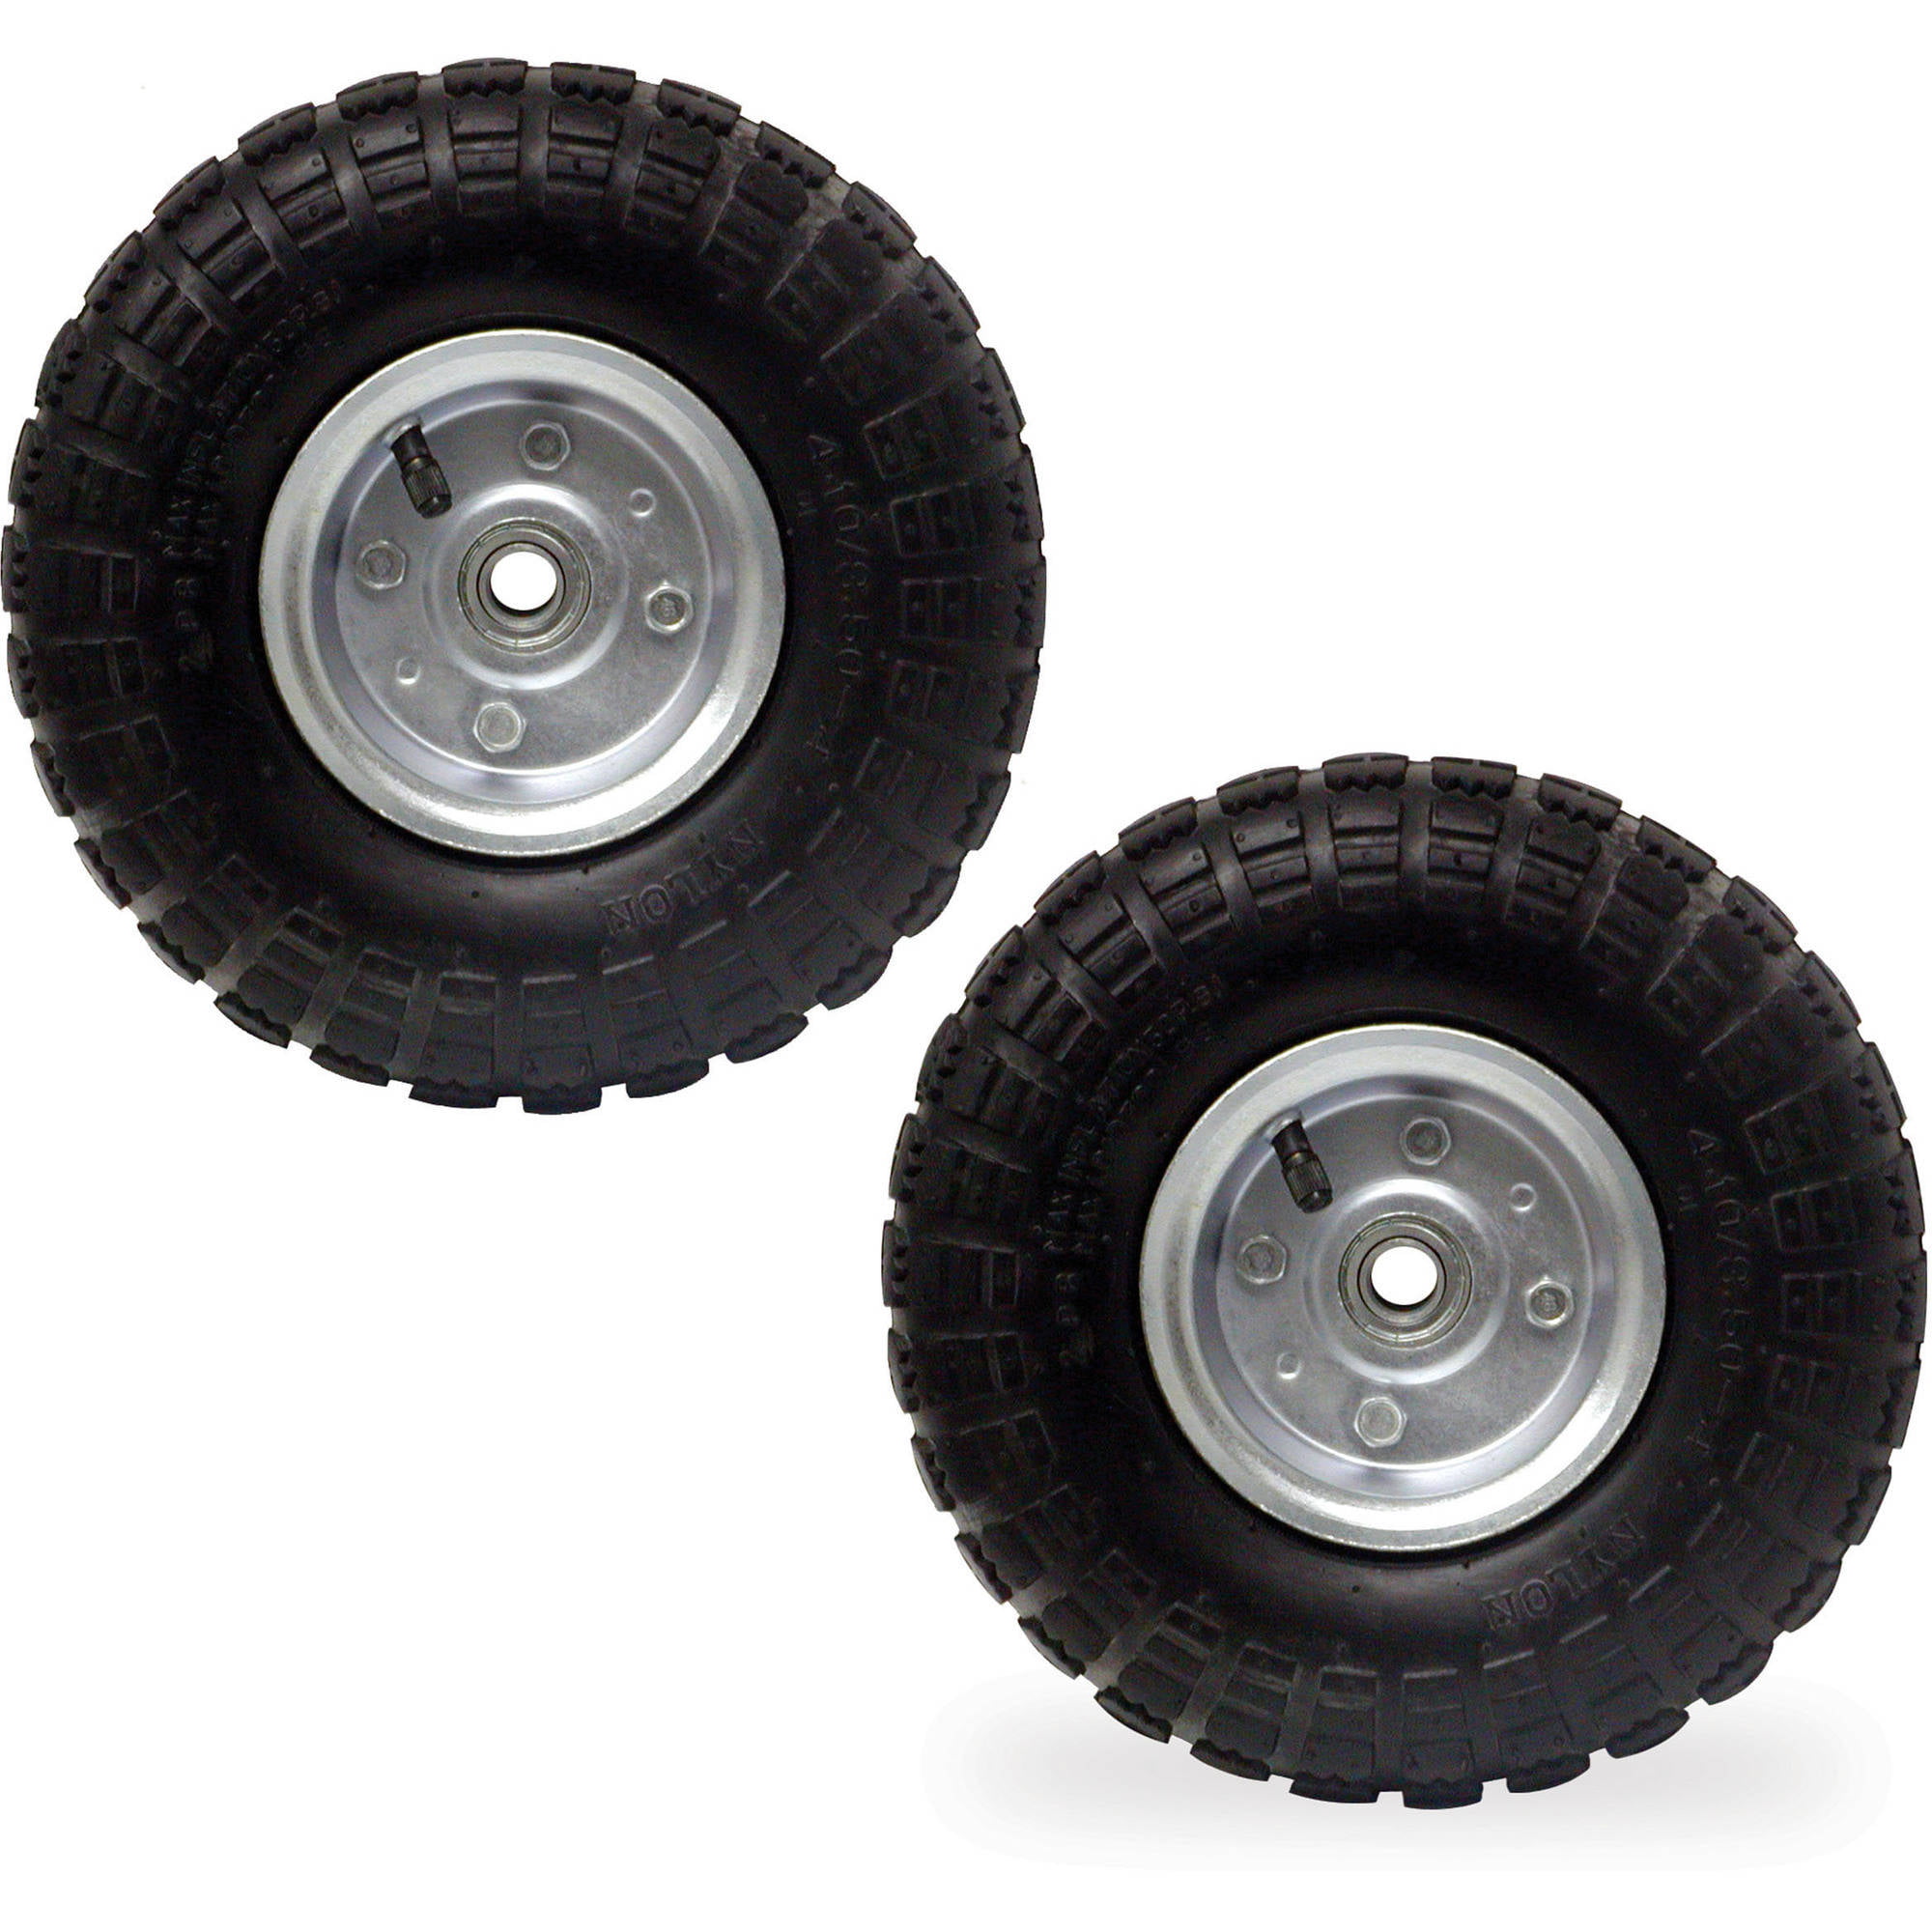 Air Tire 10” For Dolly Cart Wagon *2PC Set* Industrial Quality*Free Shipping 